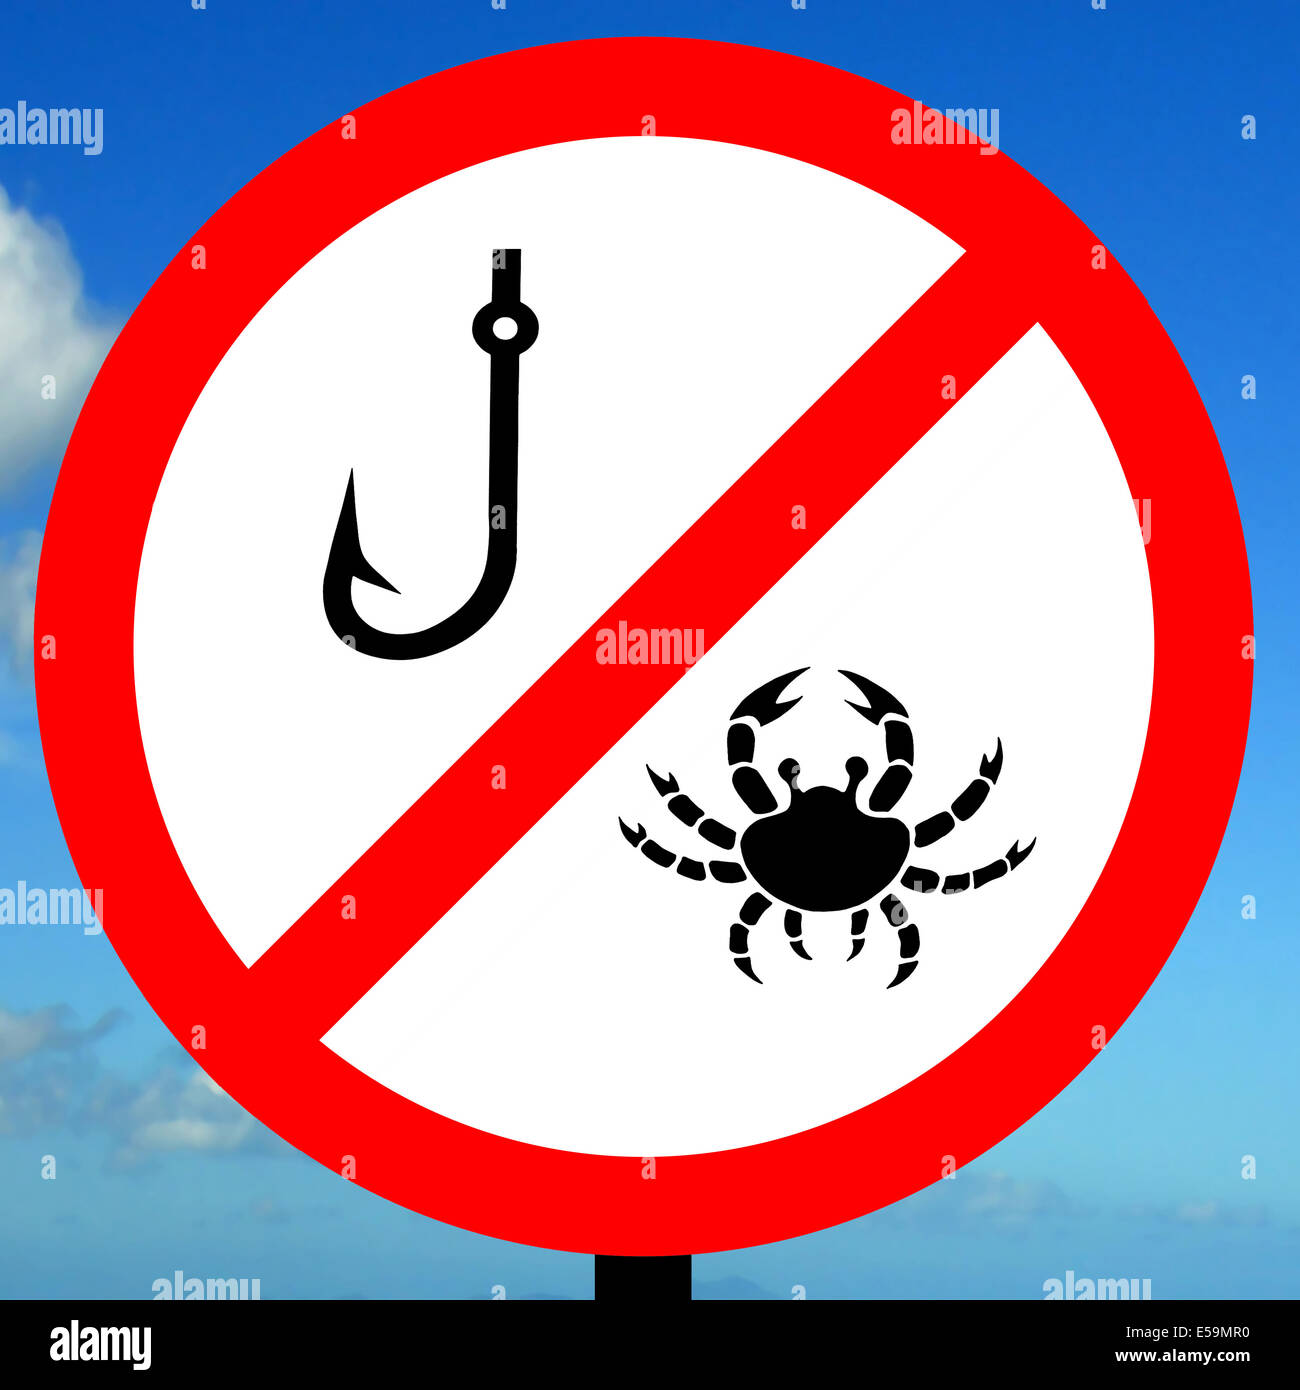 No fishing allowed in this area order sign Stock Photo